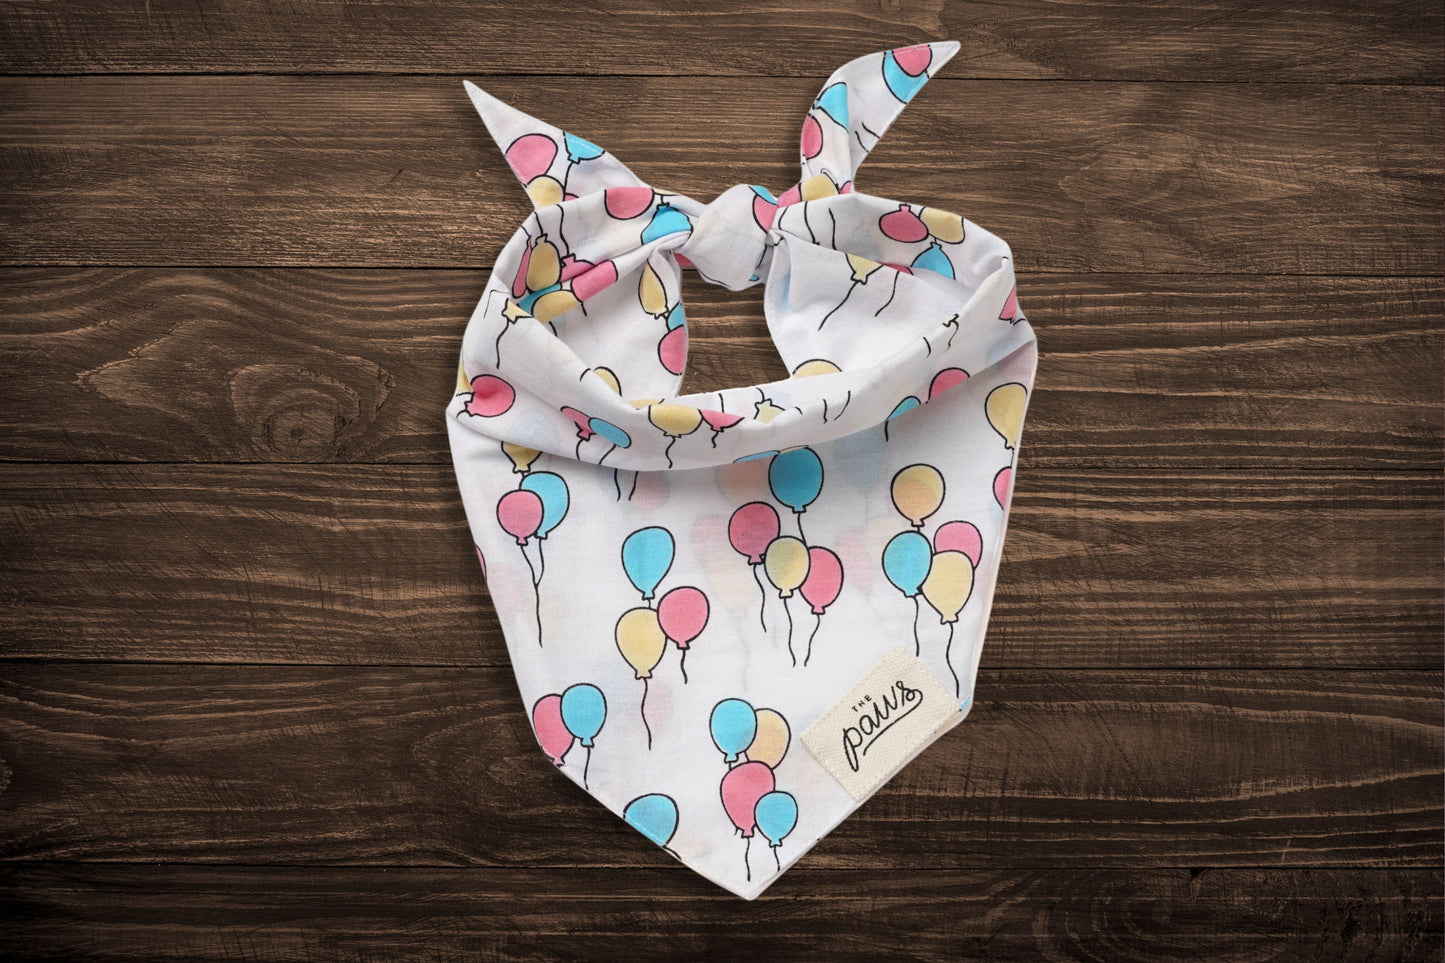 The Paws pet bandanas with party balloon designs.